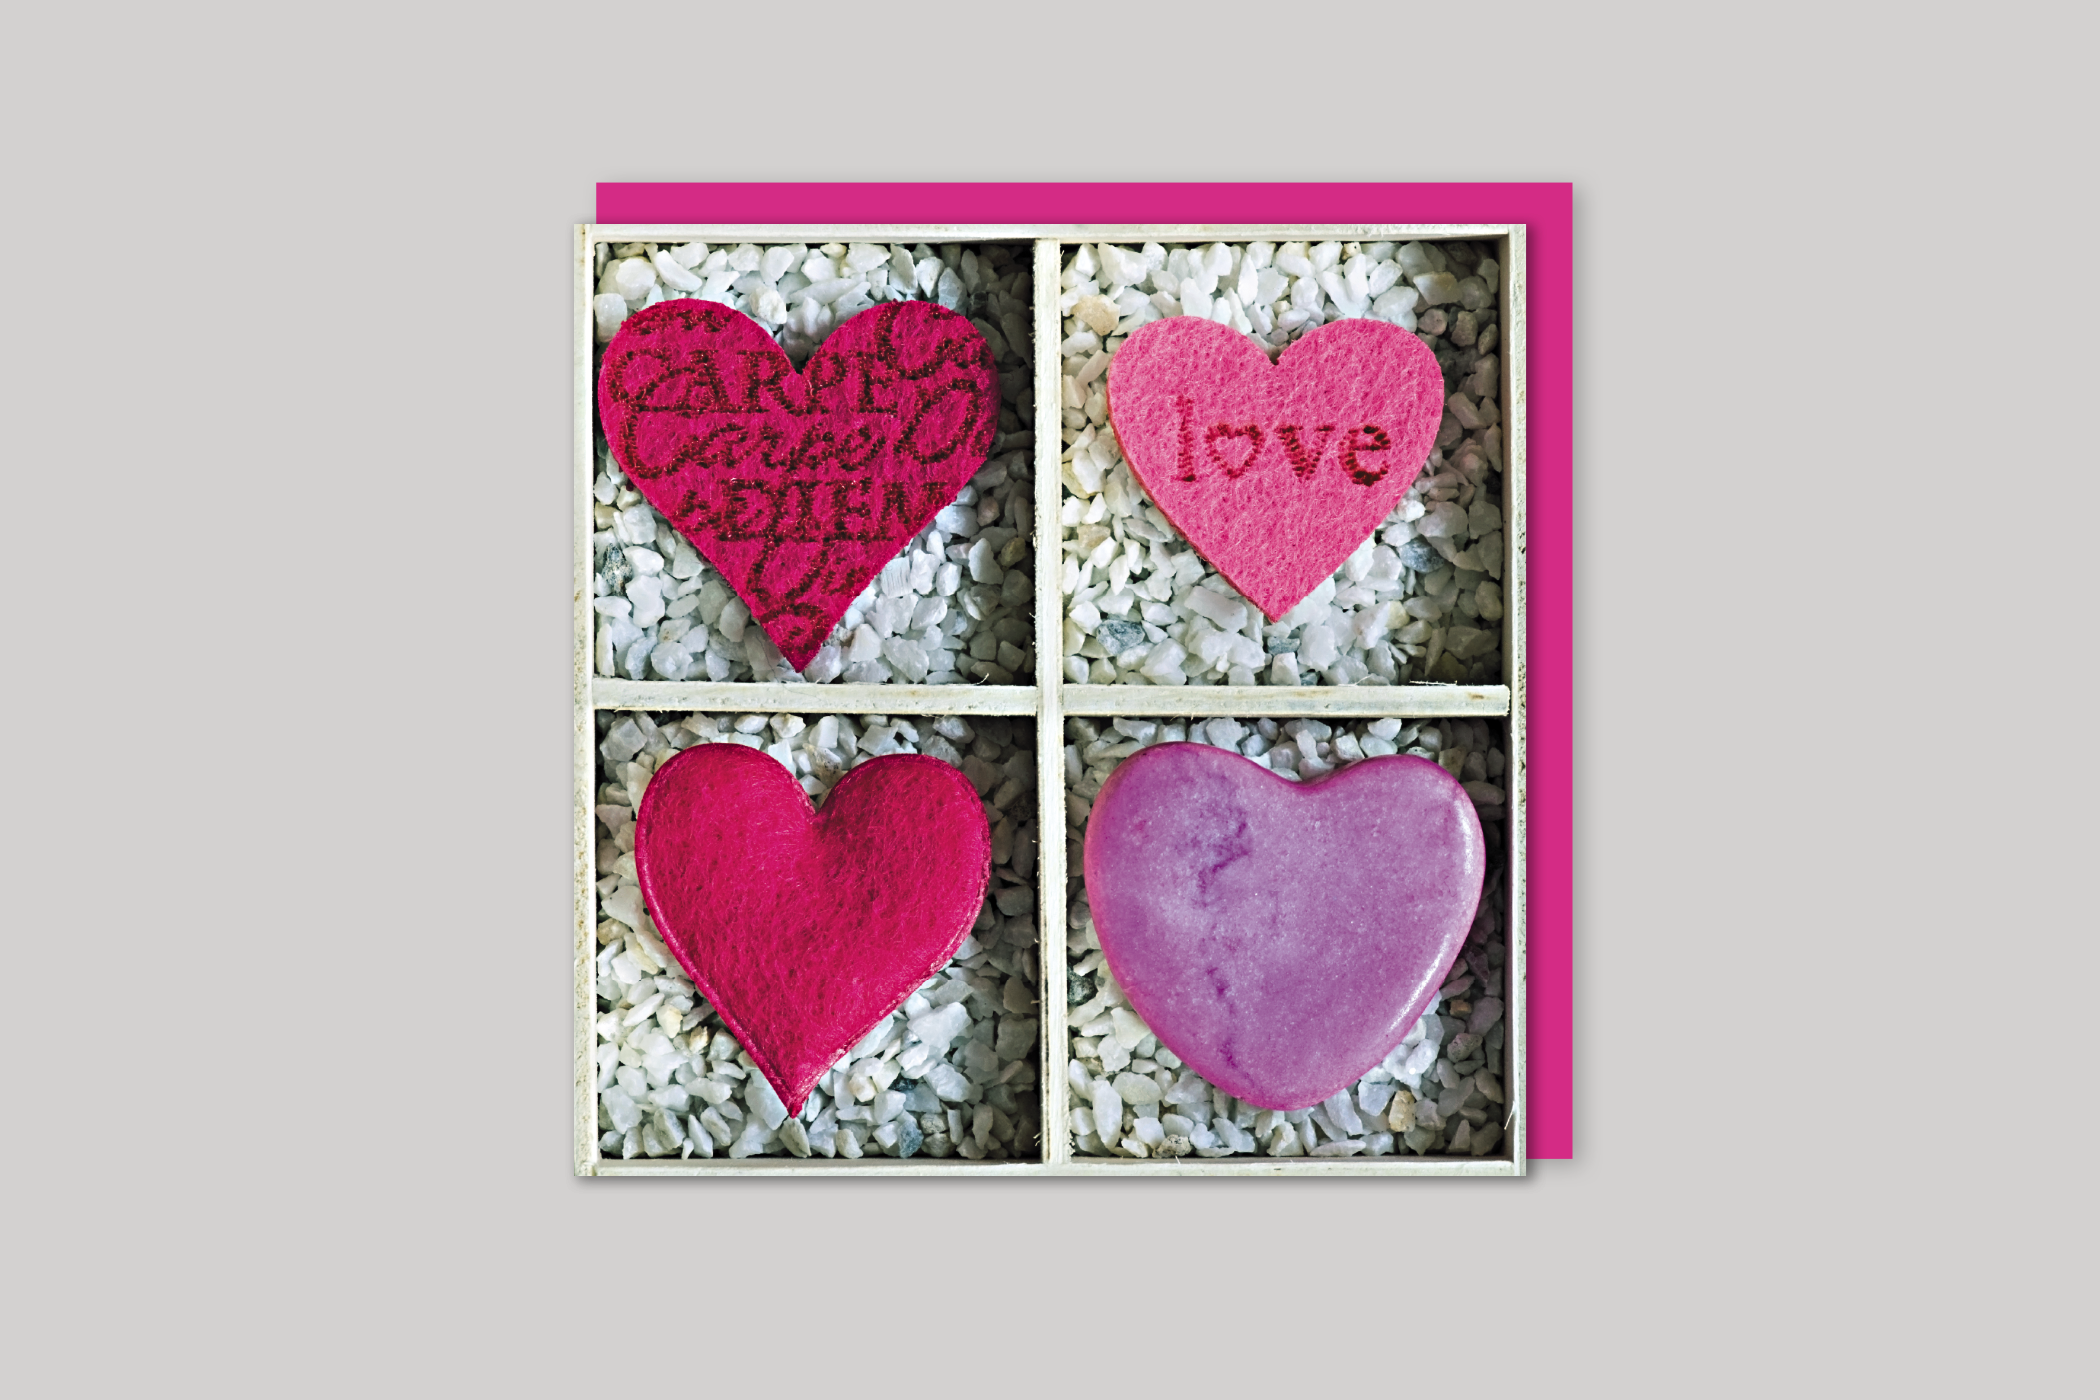 Love Hearts from Exposure range of photographic cards by Icon, back page.